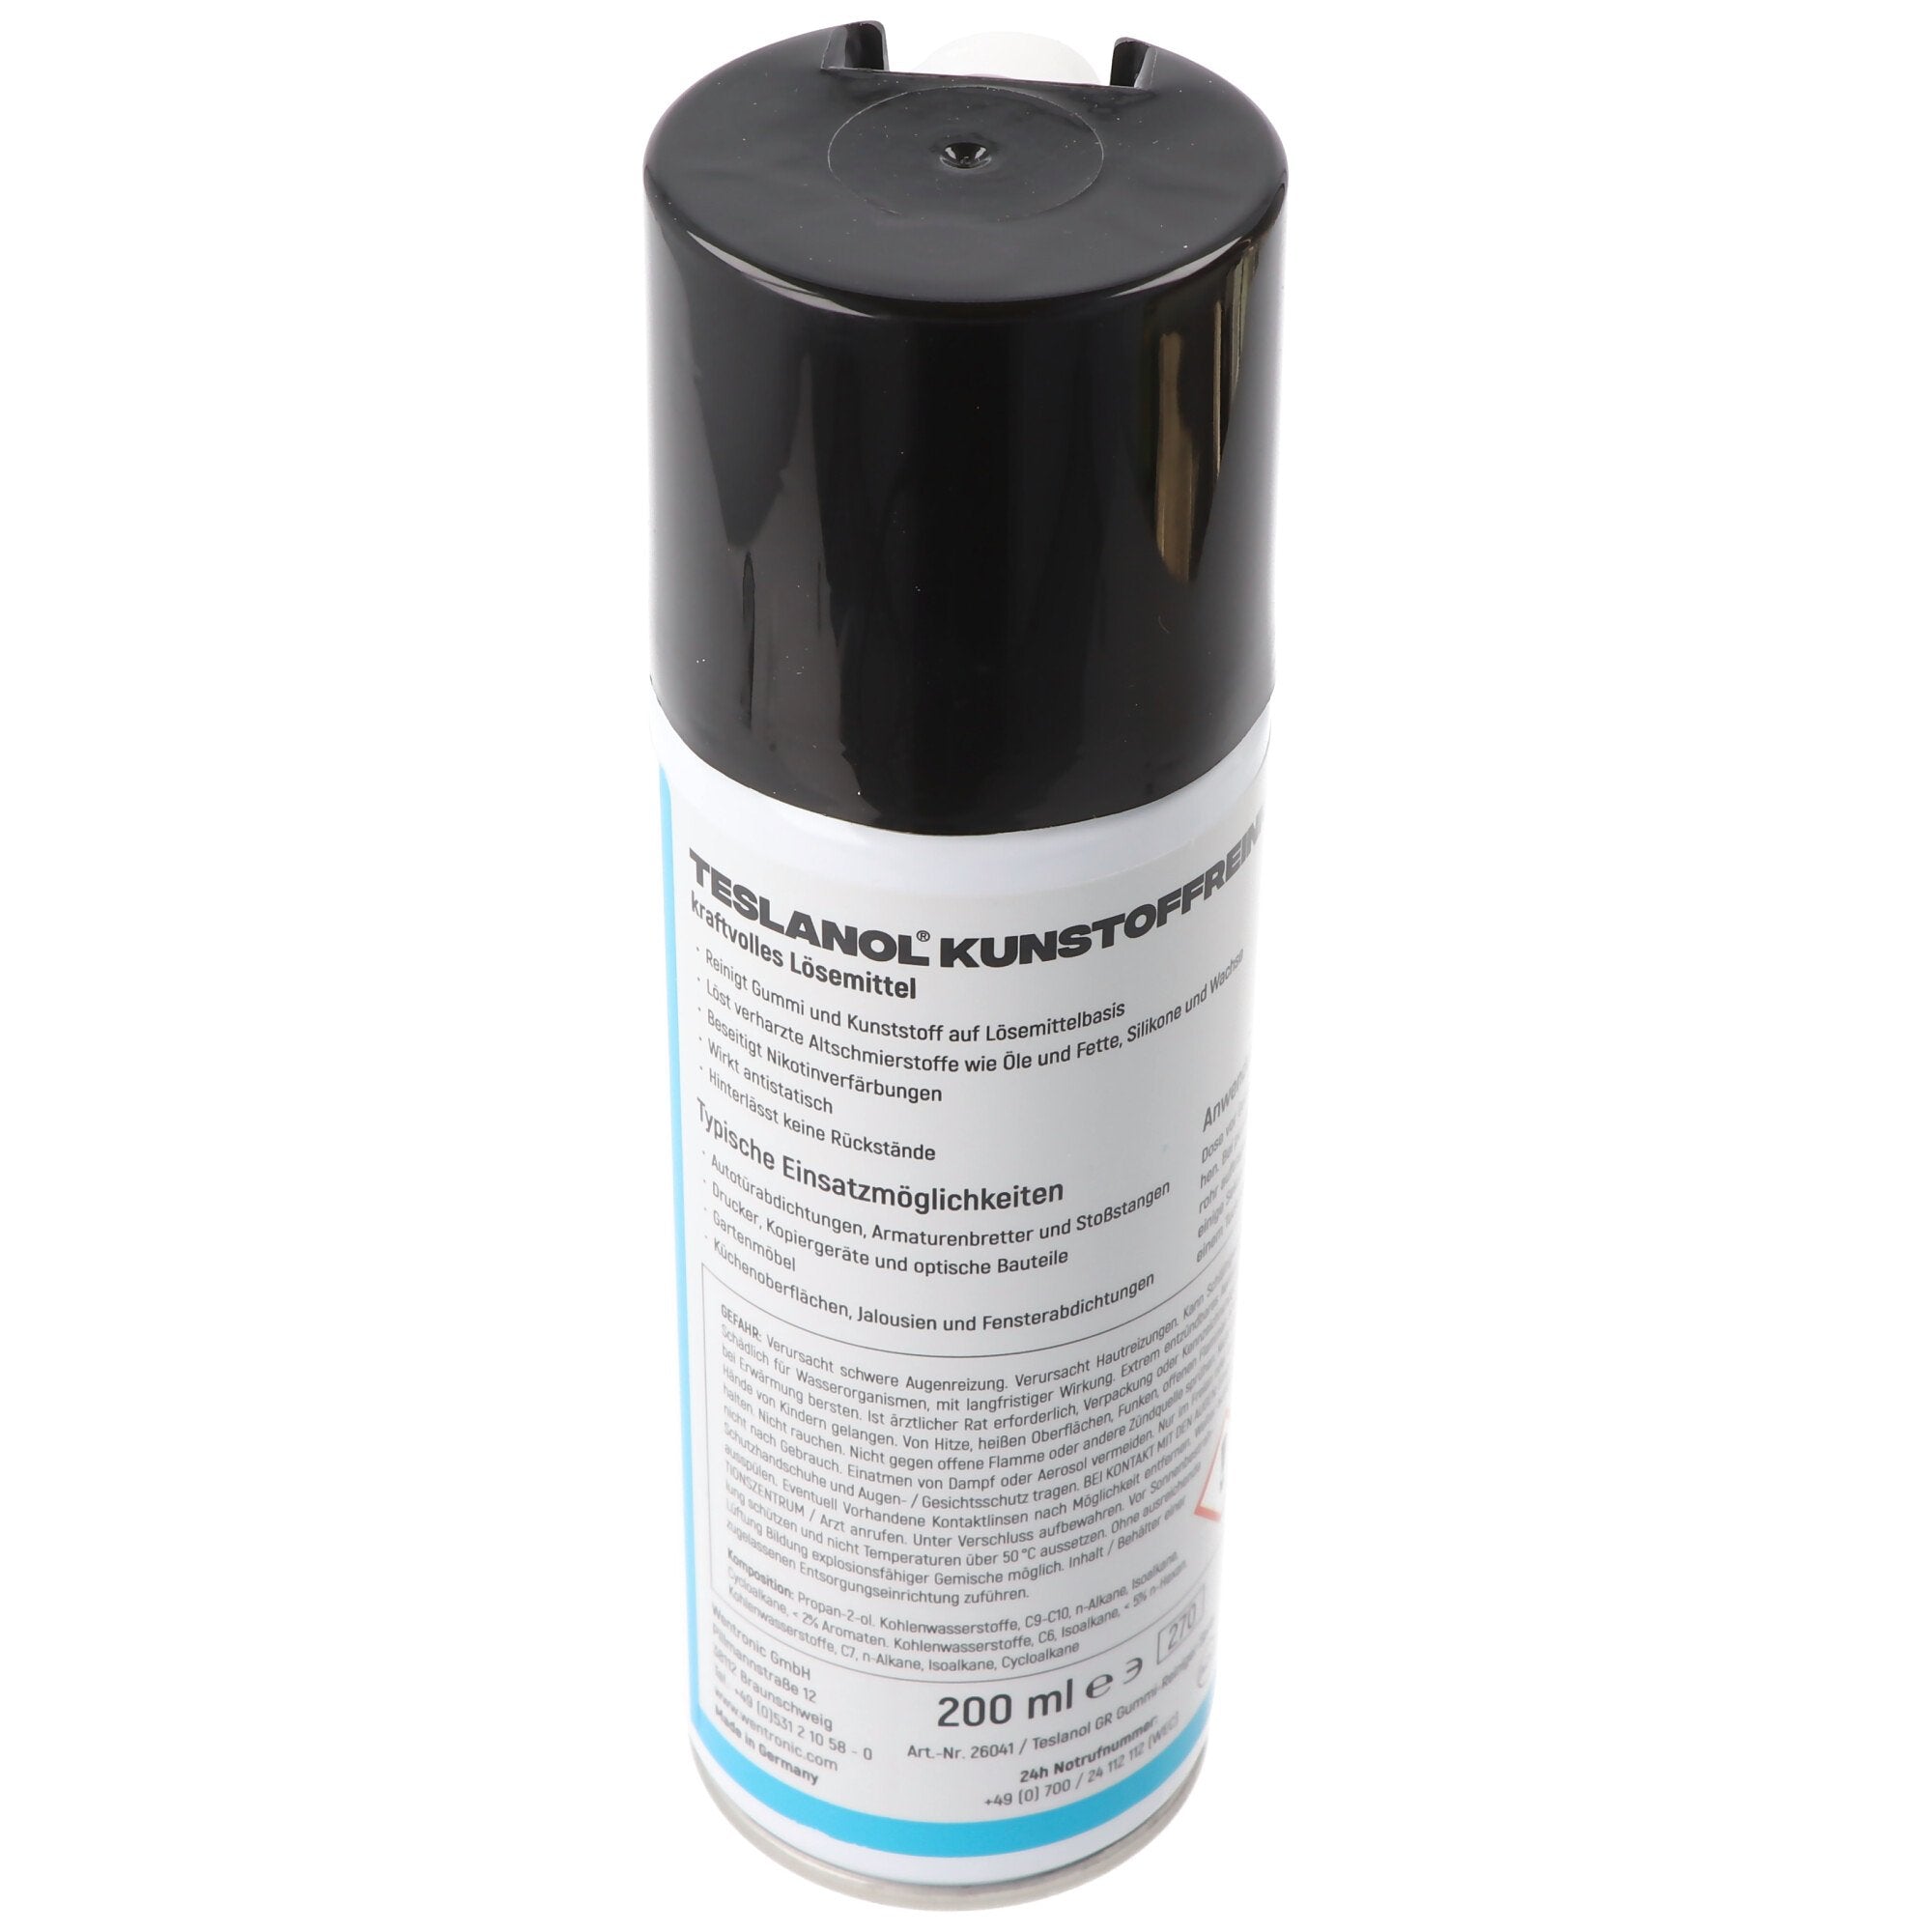 Teslanol GR rubber cleaner spray 200ml especially for rubber parts